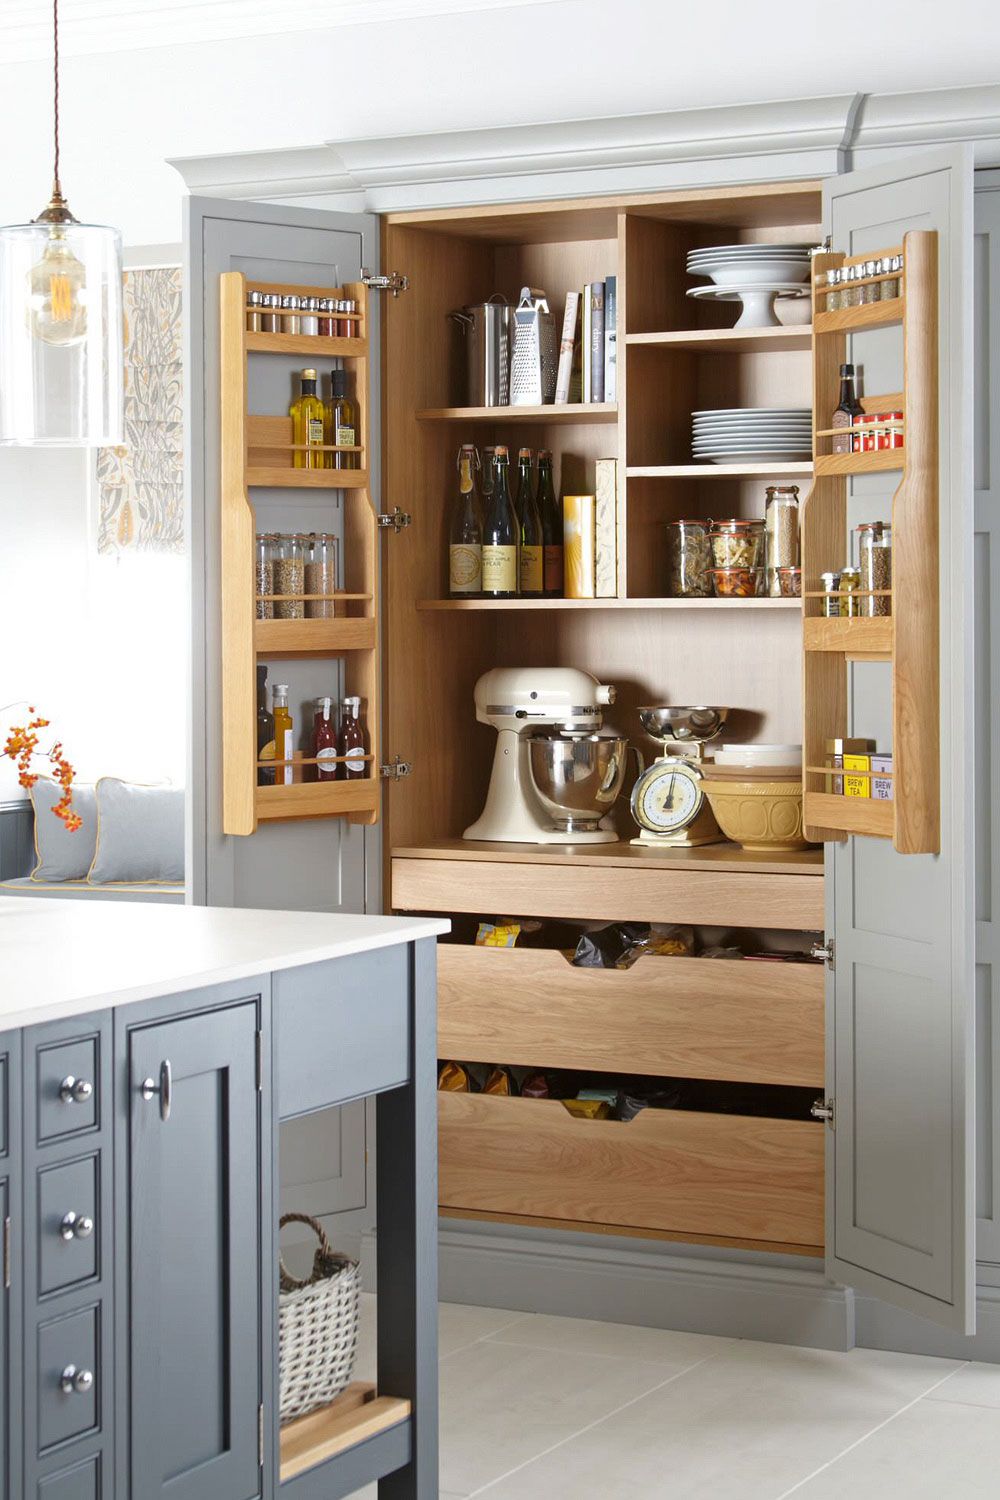 Transform Your Kitchen with Clever
Storage Solutions